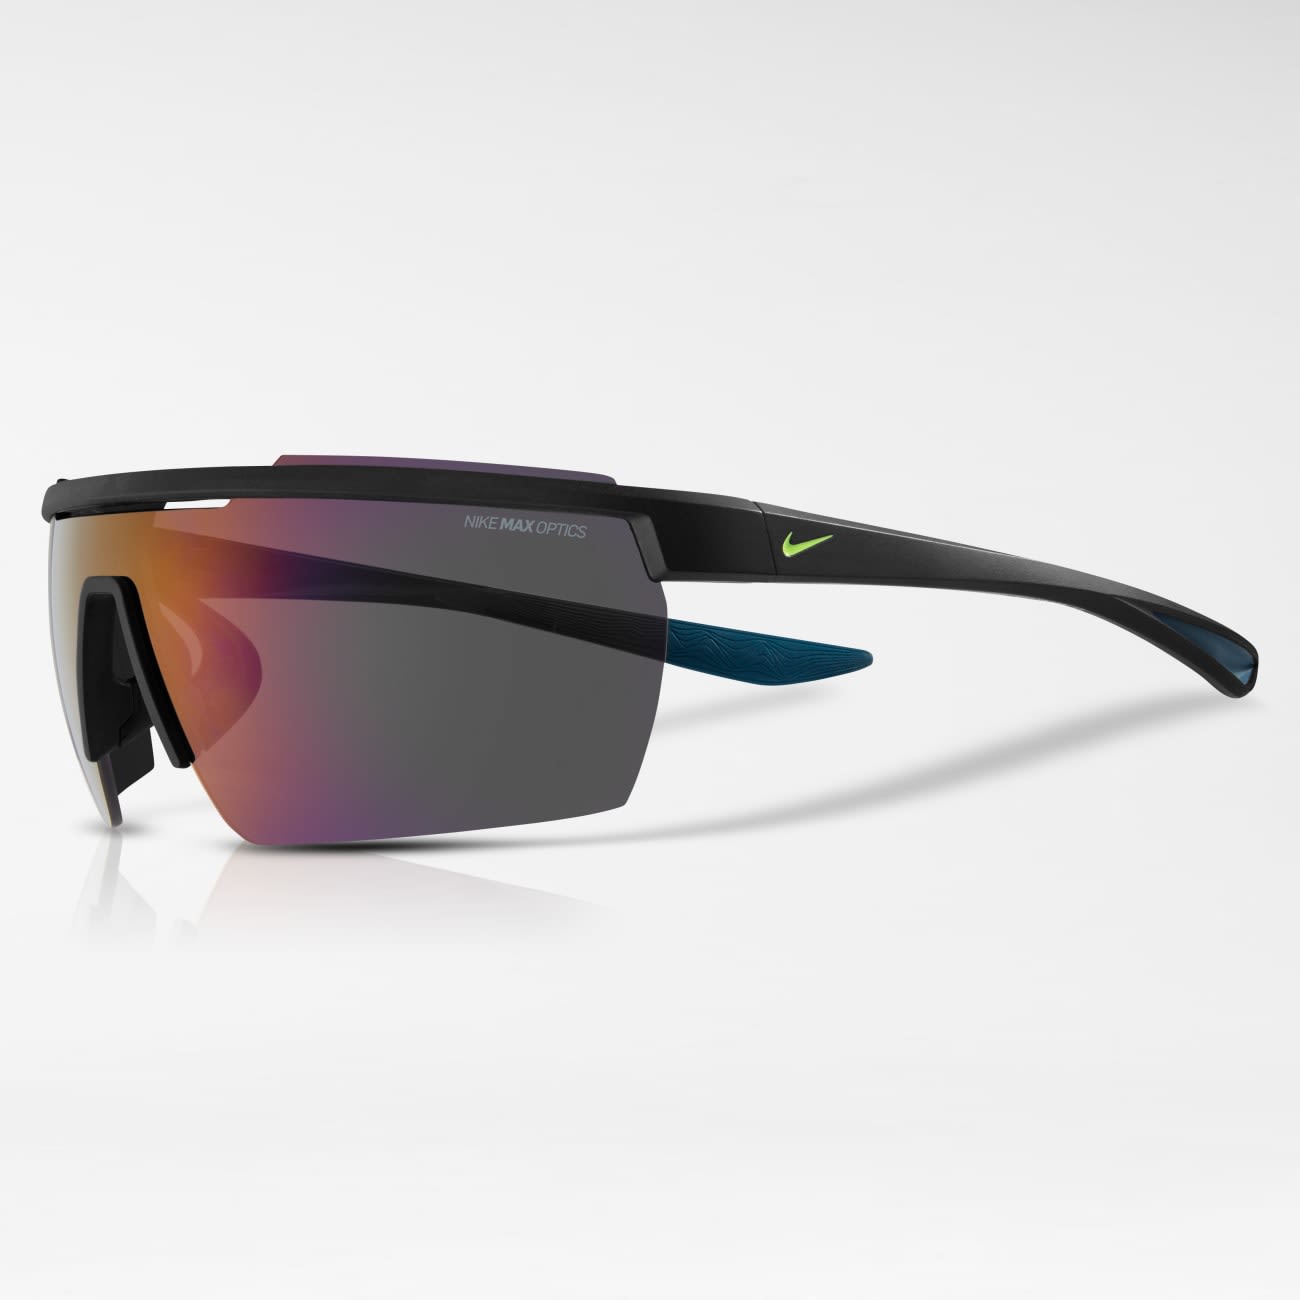 New WARRIOR Wrap Sports high quality driving Comfort Sunglasses For Men & Women 